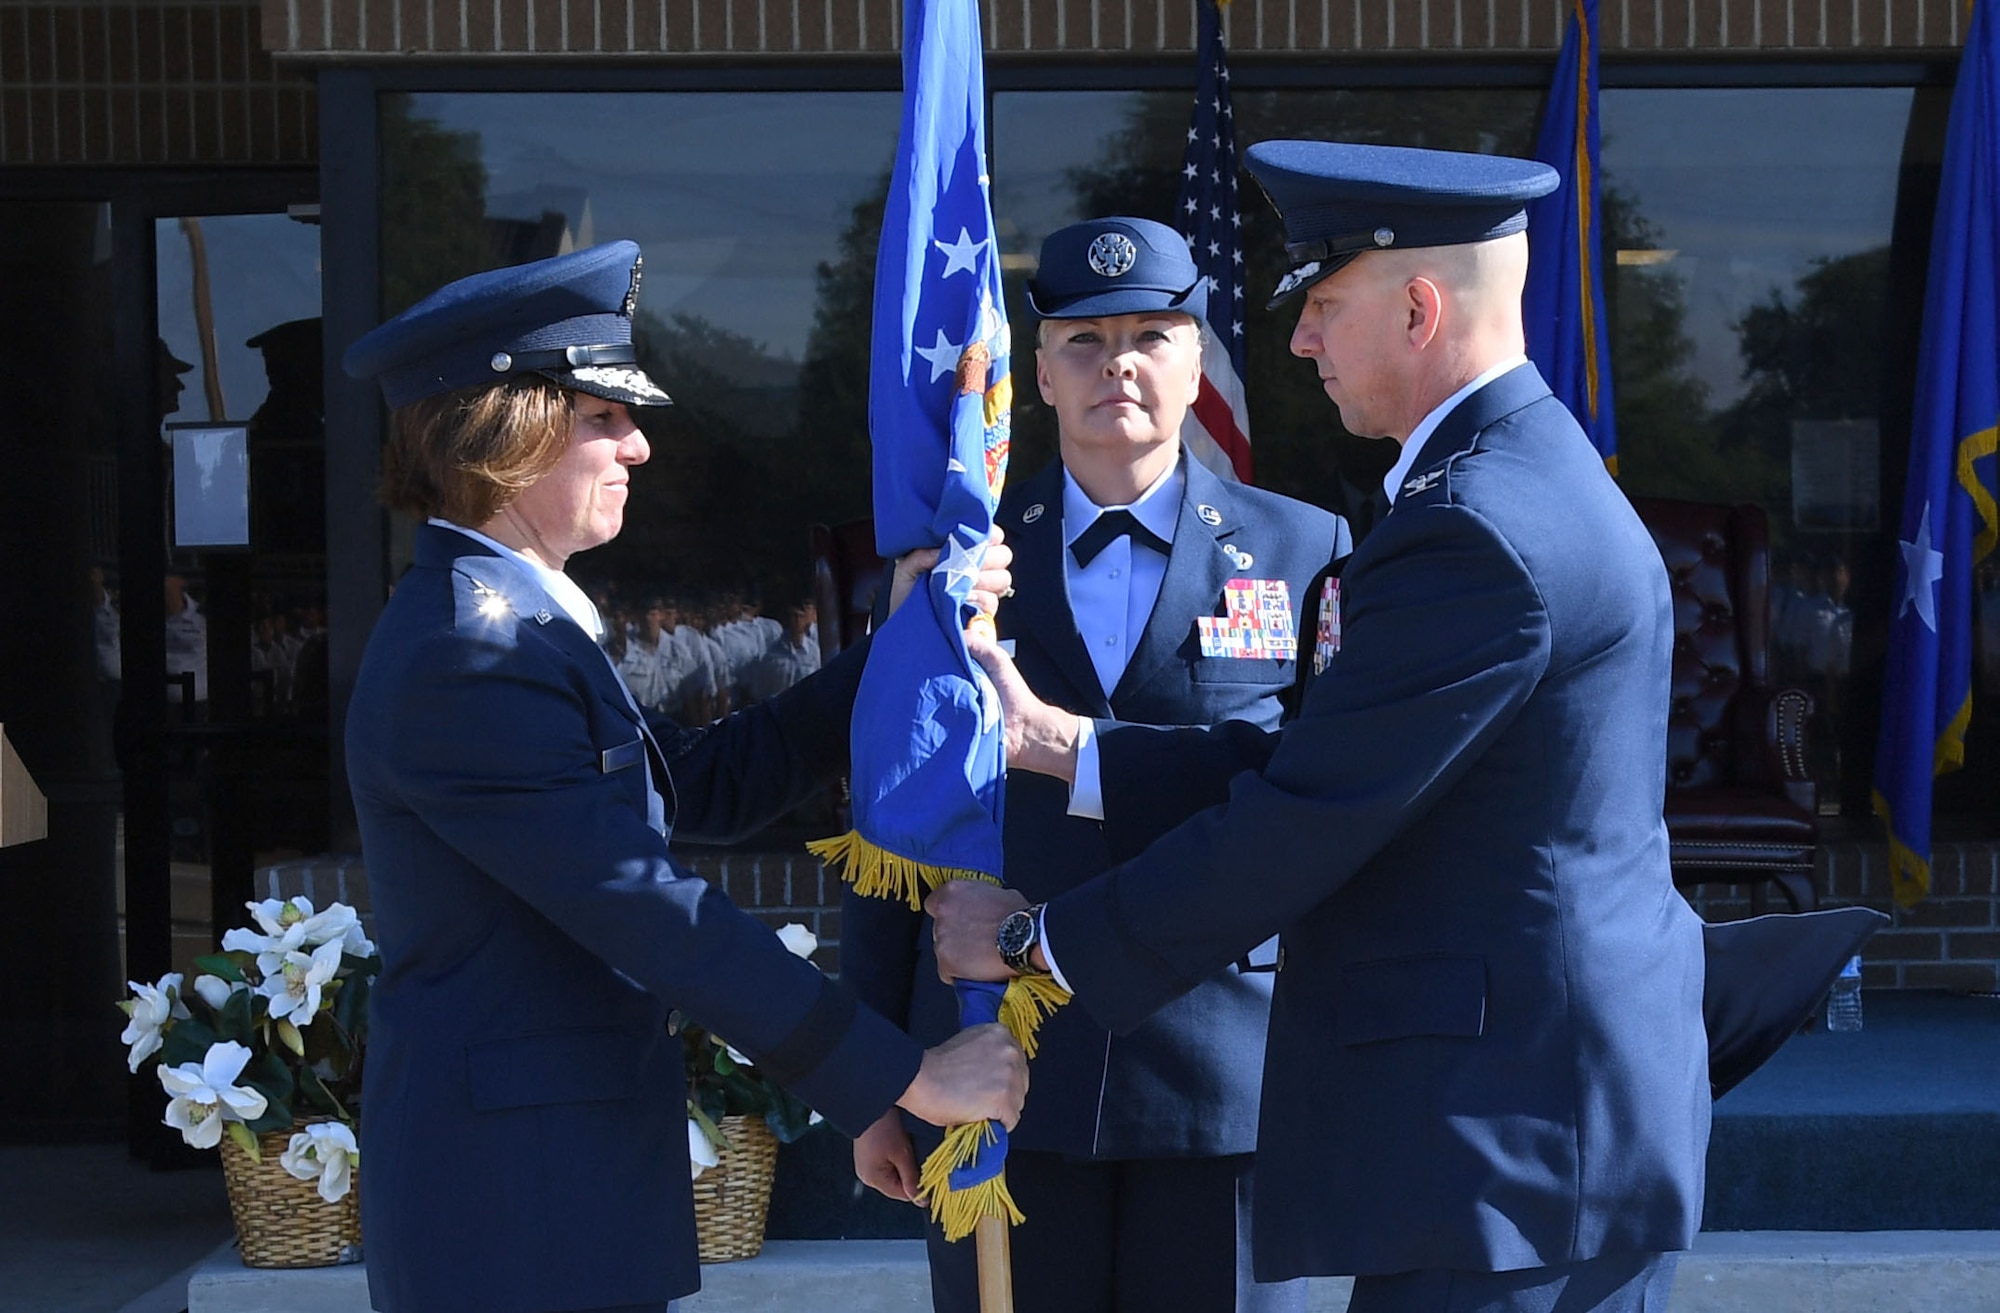 U.S. Air Force Maj. Gen. Andrea Tullos, Second Air Force commander, passes the guidon to Col. William Hunter, 81st Training Wing commander, during a change of command ceremony on the Levitow Training Support Facility drill pad at Keesler Air Force Base, Mississippi, June 17, 2021. The ceremony is a symbol of command being exchanged from one commander to the next. Hunter assumed command of the 81st TRW from Col. Heather Blackwell. (U.S. Air Force photo by Kemberly Groue)